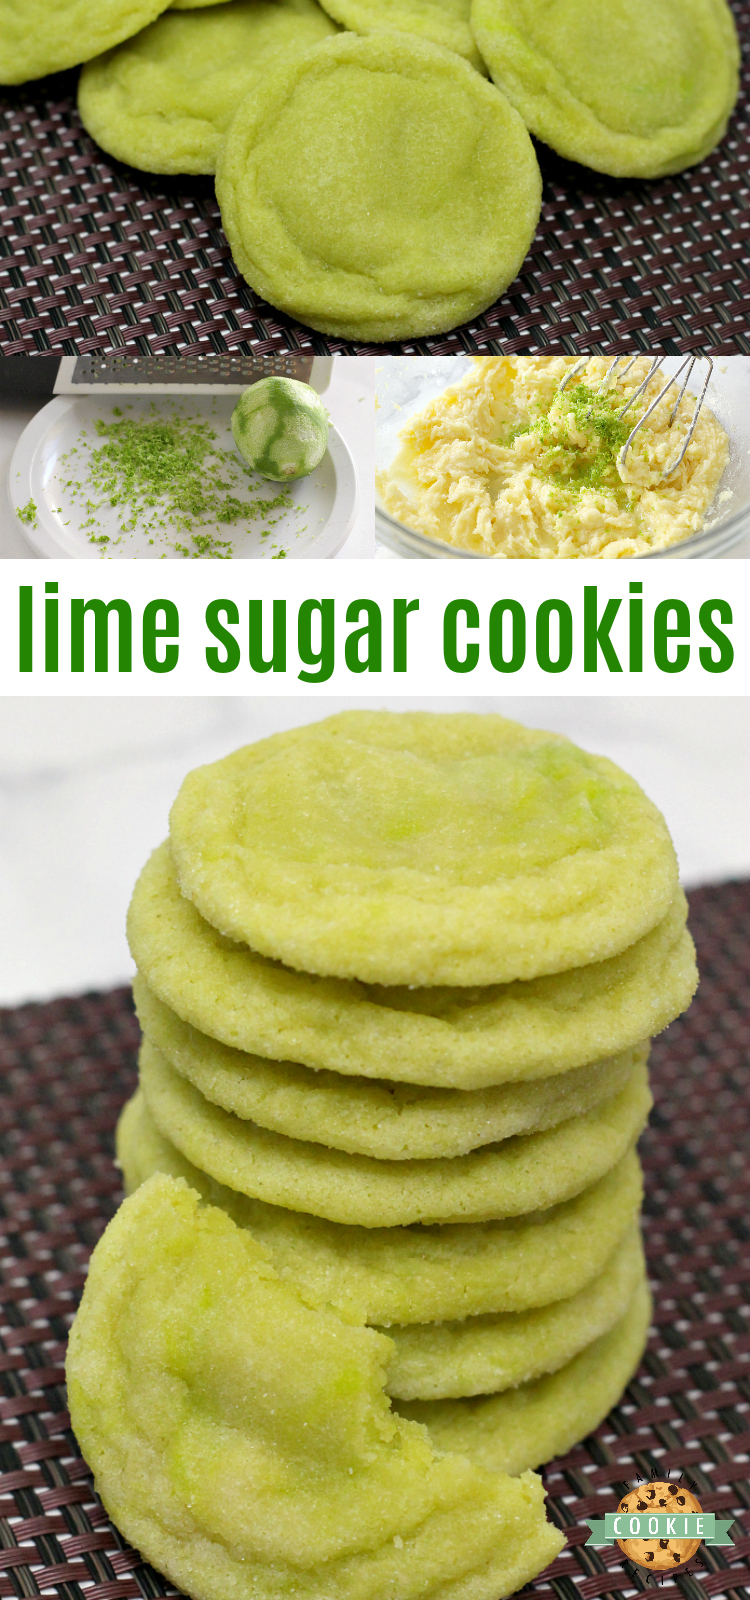 Lime Sugar Cookies are soft, delicious and packed with lime flavor! This cookie recipe is so simple and everyone loves these sugar cookies with a fun little twist of lime!